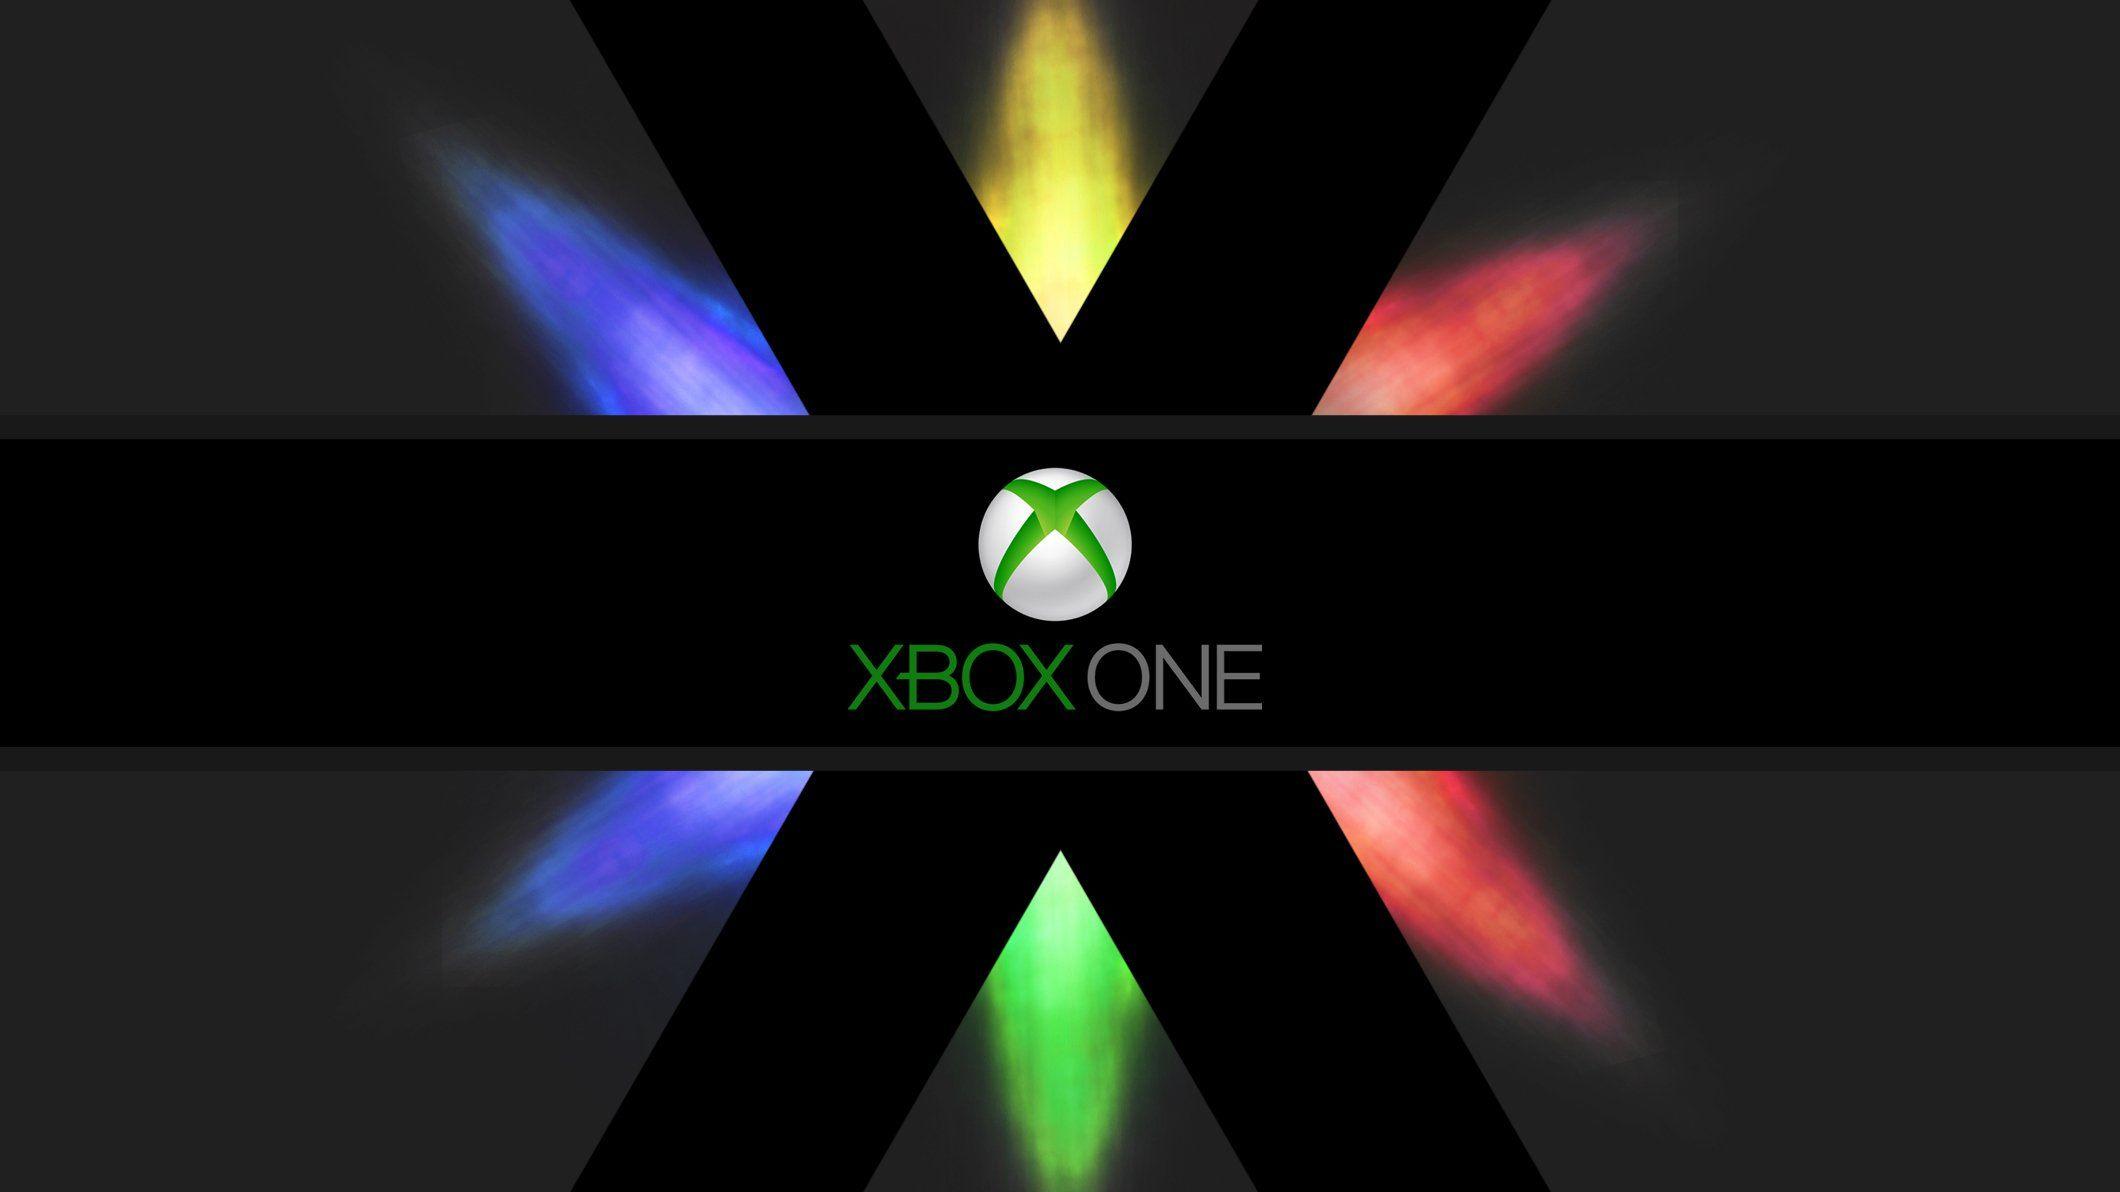 Xbox One Wallpapers HD.